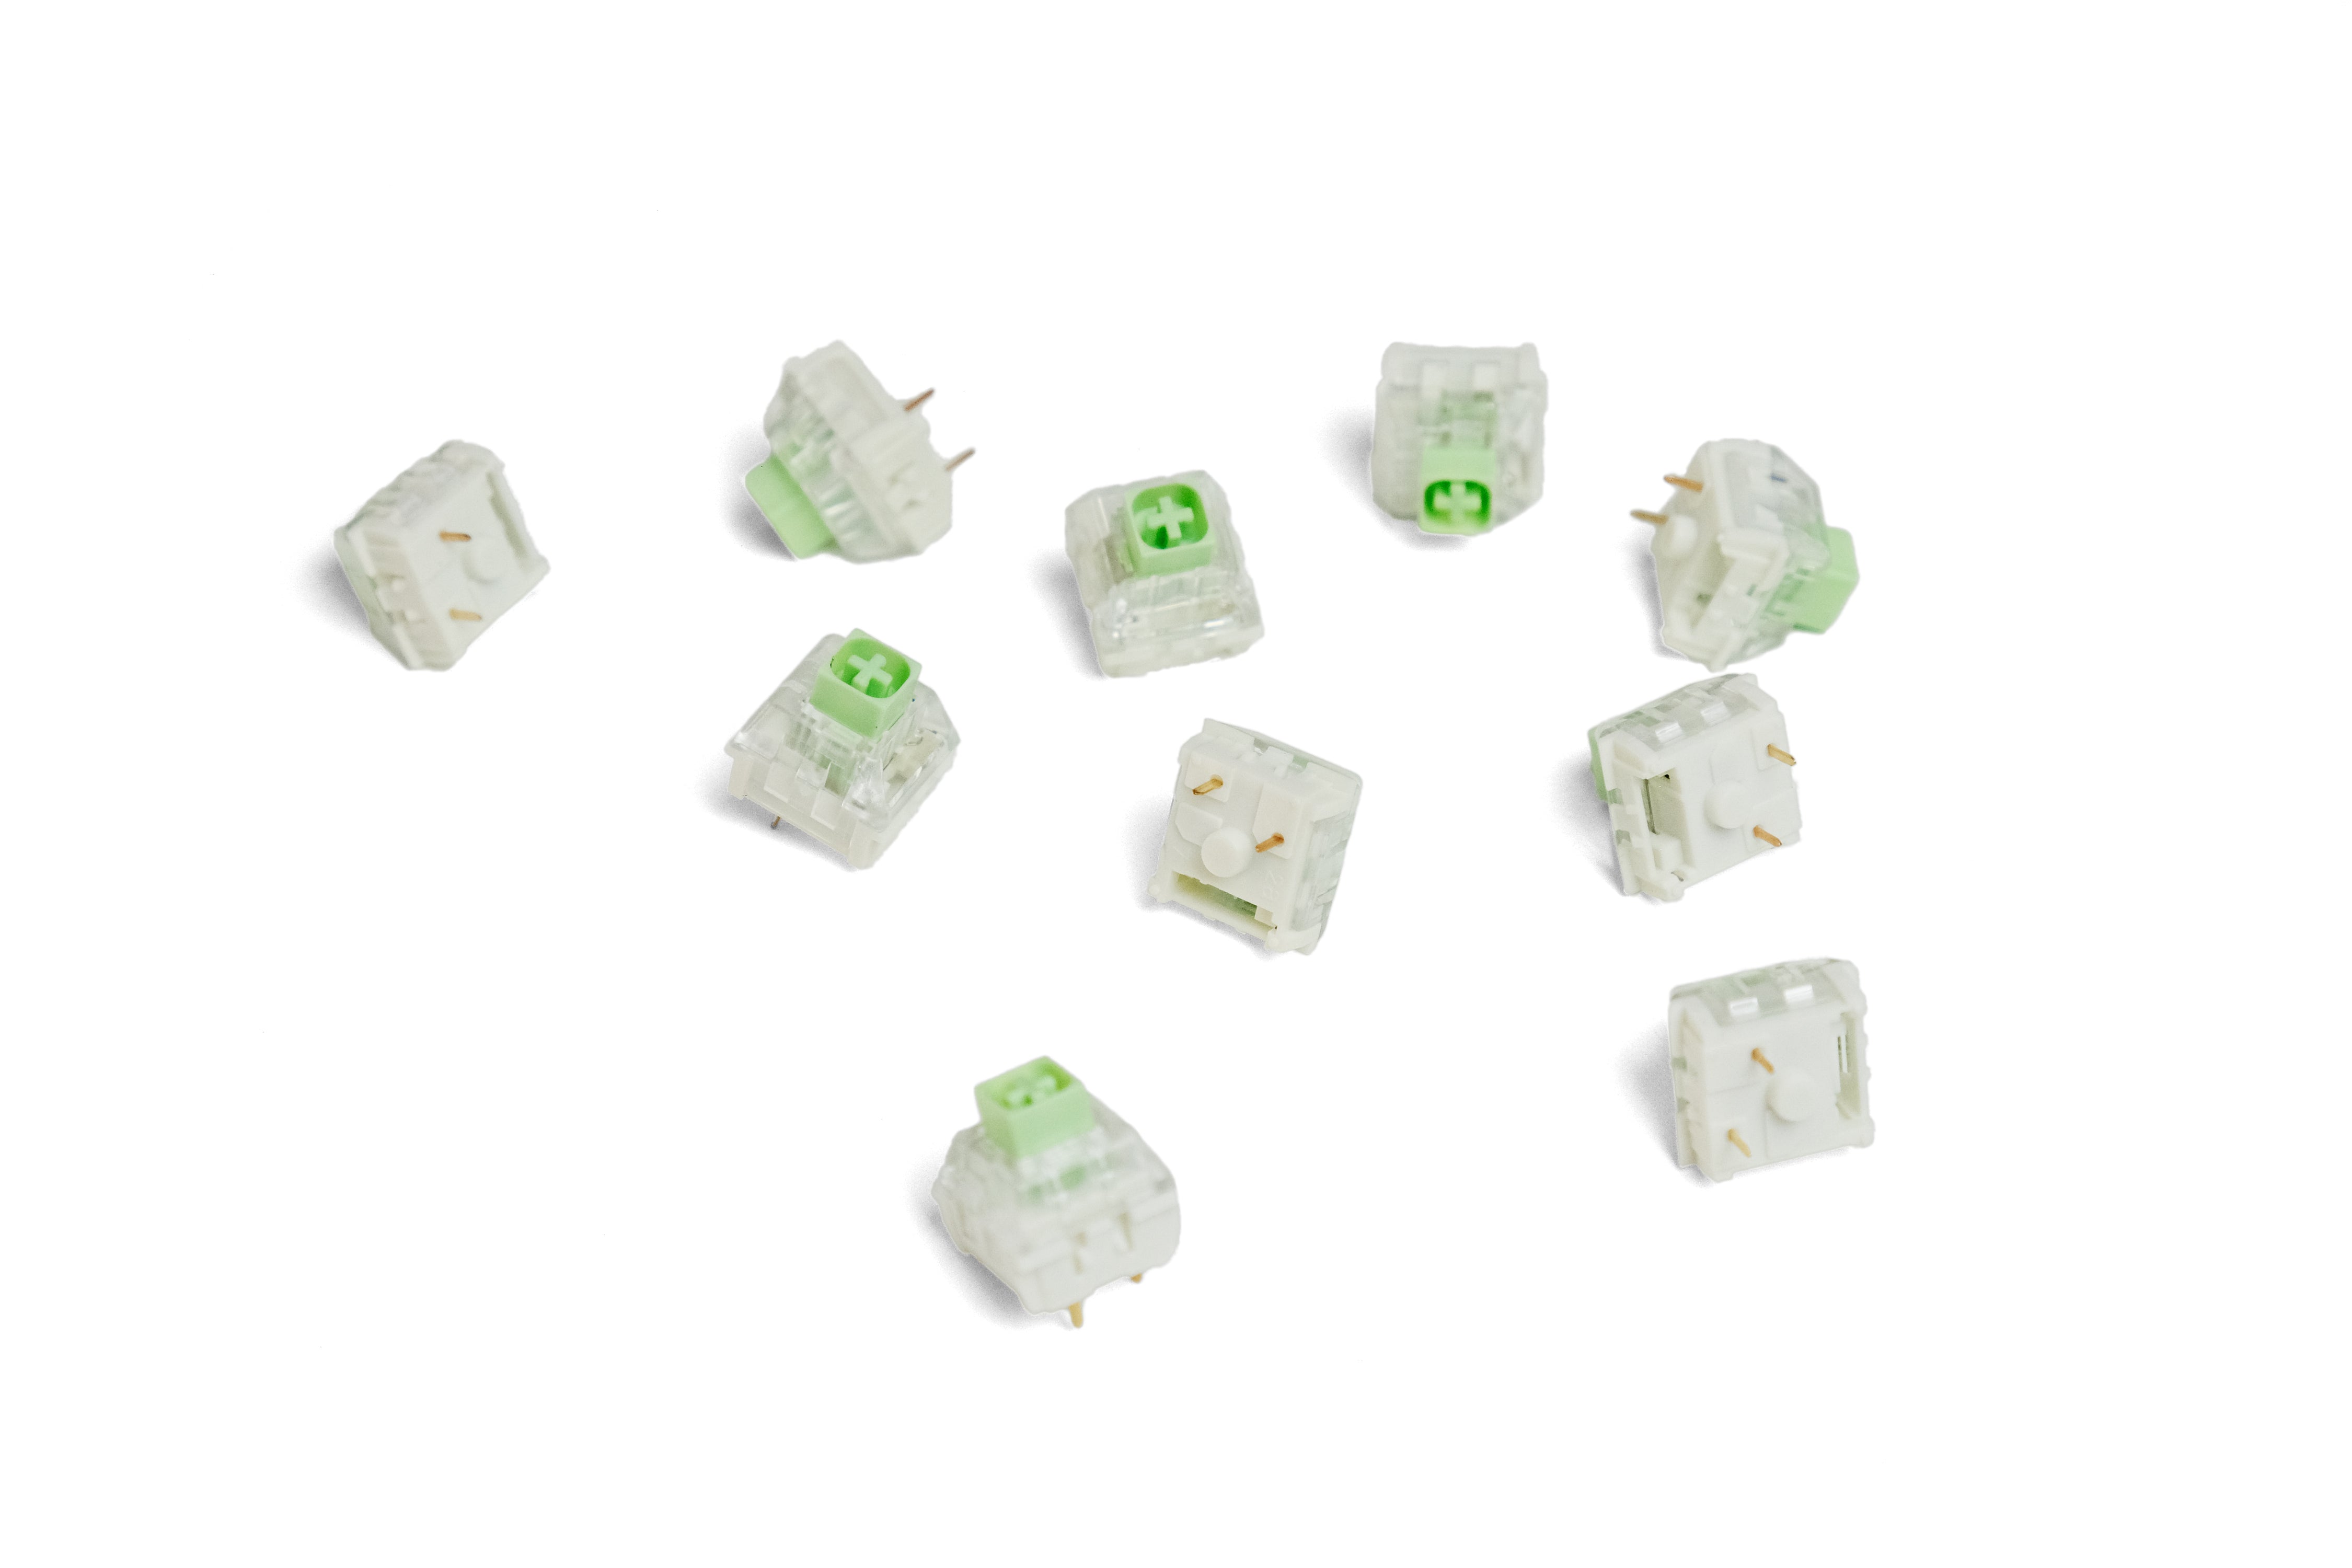 Group of Kailh Box Jade Clicky Switches